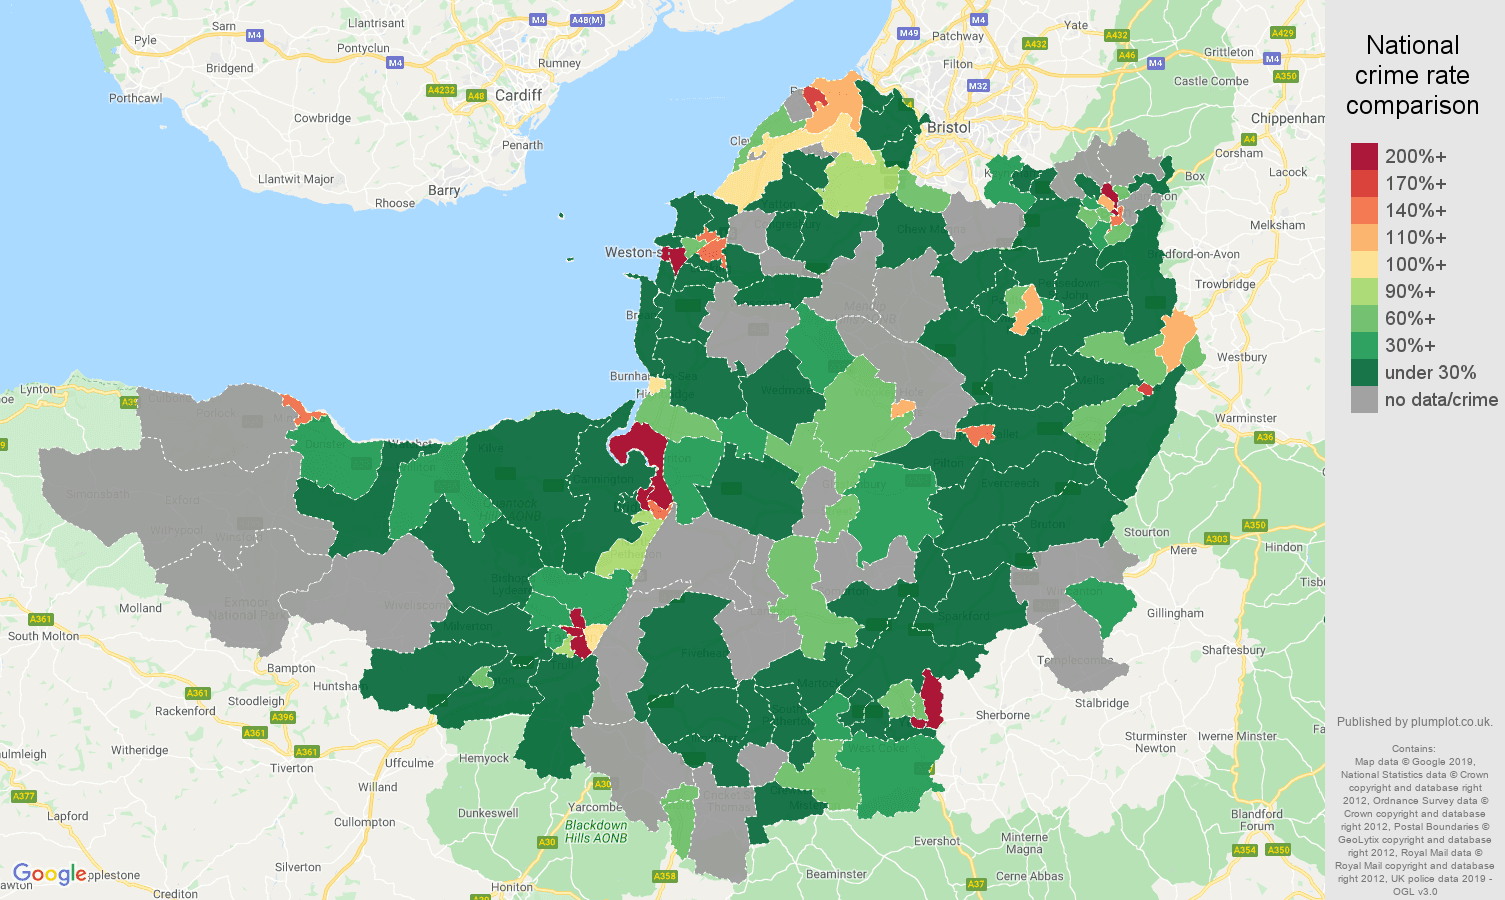 Somerset shoplifting crime rate comparison map